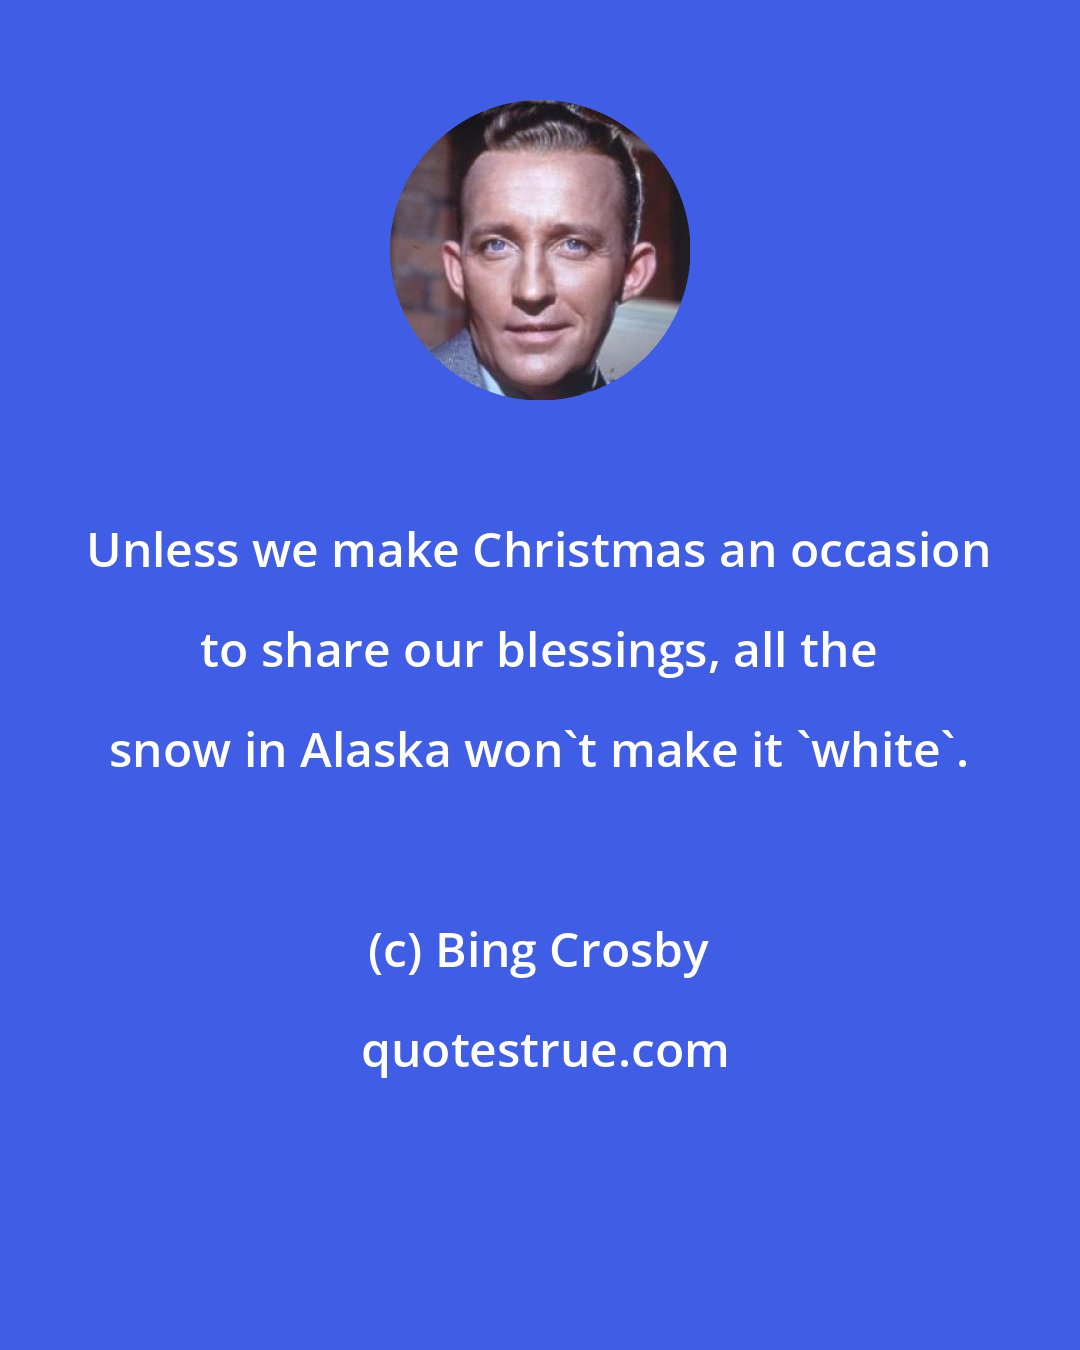 Bing Crosby: Unless we make Christmas an occasion to share our blessings, all the snow in Alaska won't make it 'white'.